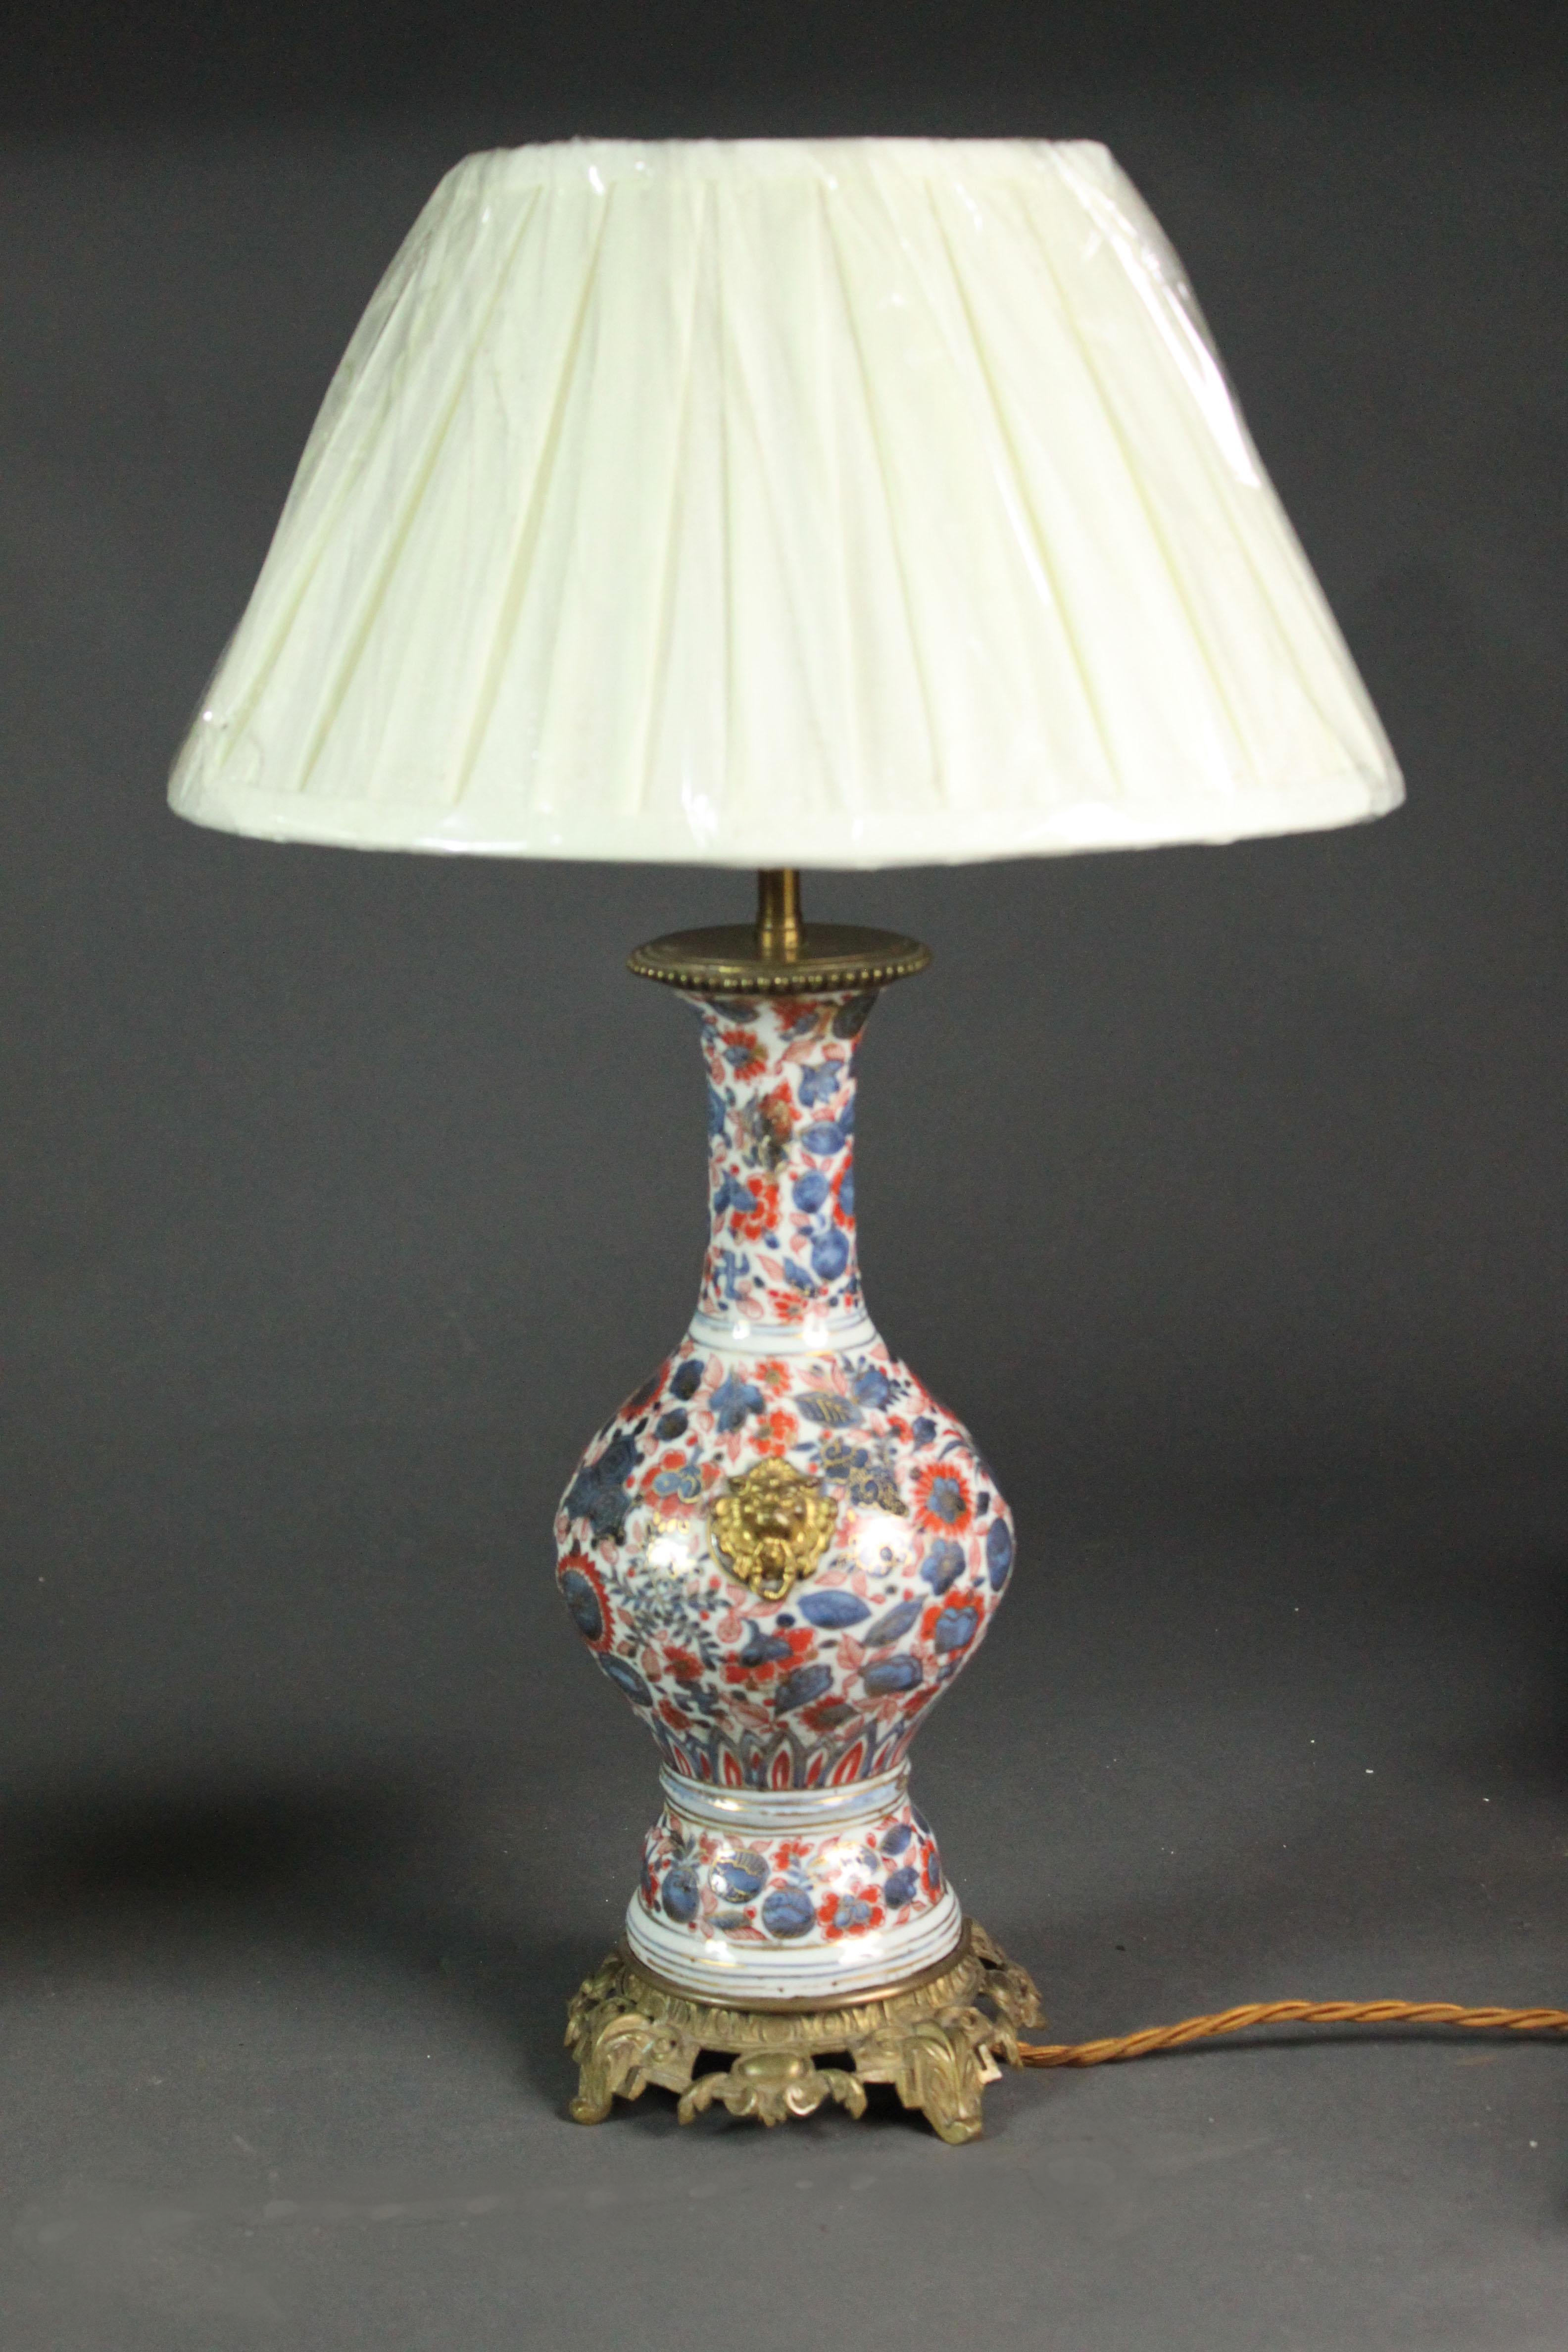 Porcelain Pair of Chinese Imari Vases Converted into Lamps